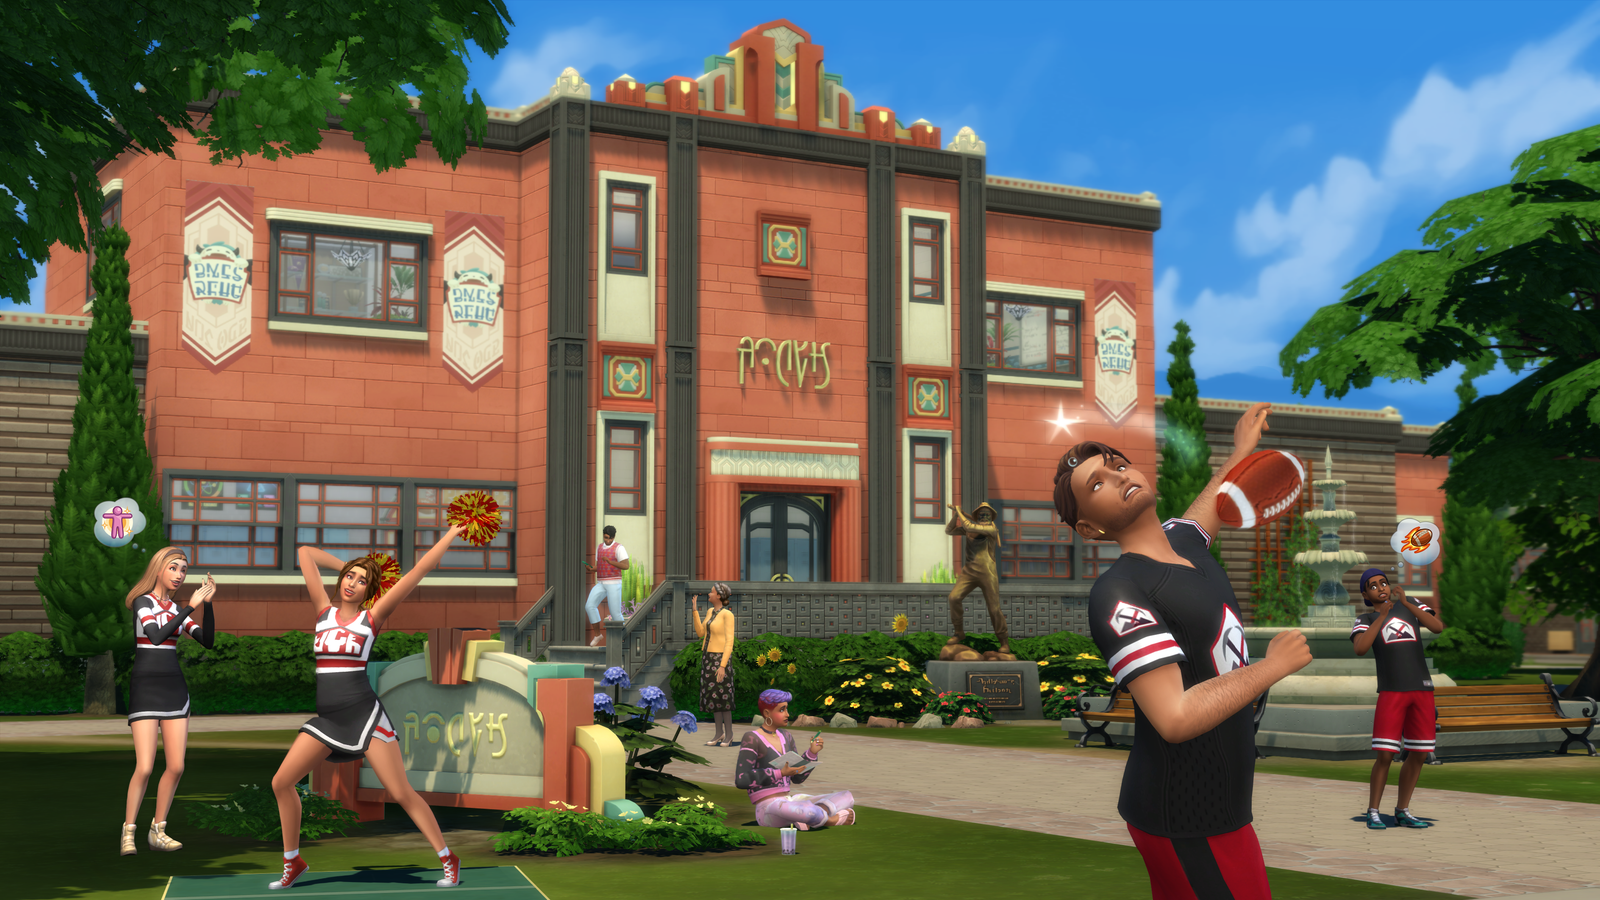 NEW SIMS 4 Free All DLC & Packs!  Use this Method to Get Sims 4